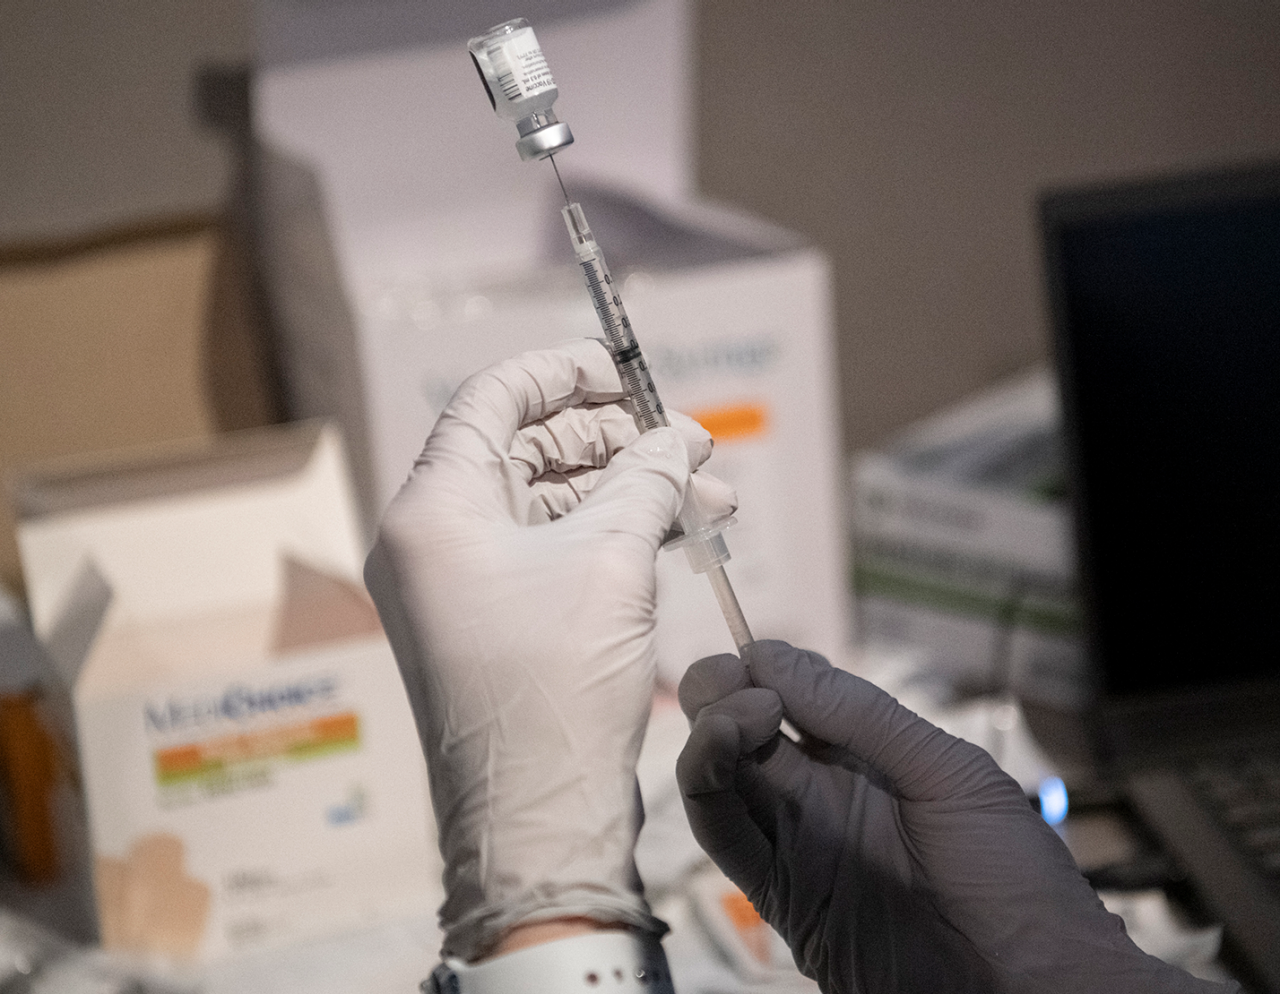 Larger needle for vaccines if you're over a certain weight